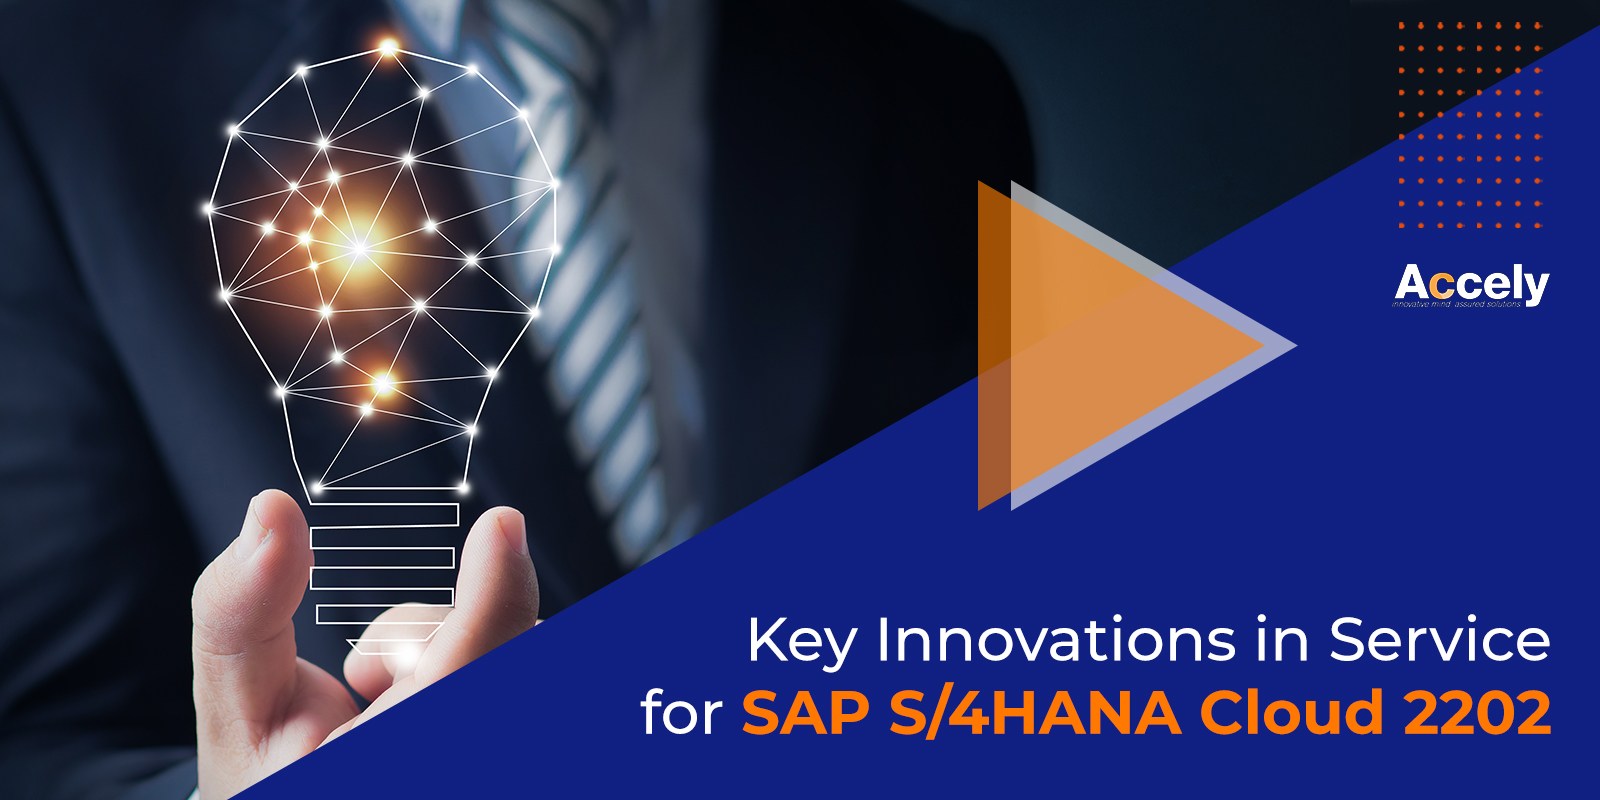 Key Innovations in Service for SAP S/4HANA Cloud 2202